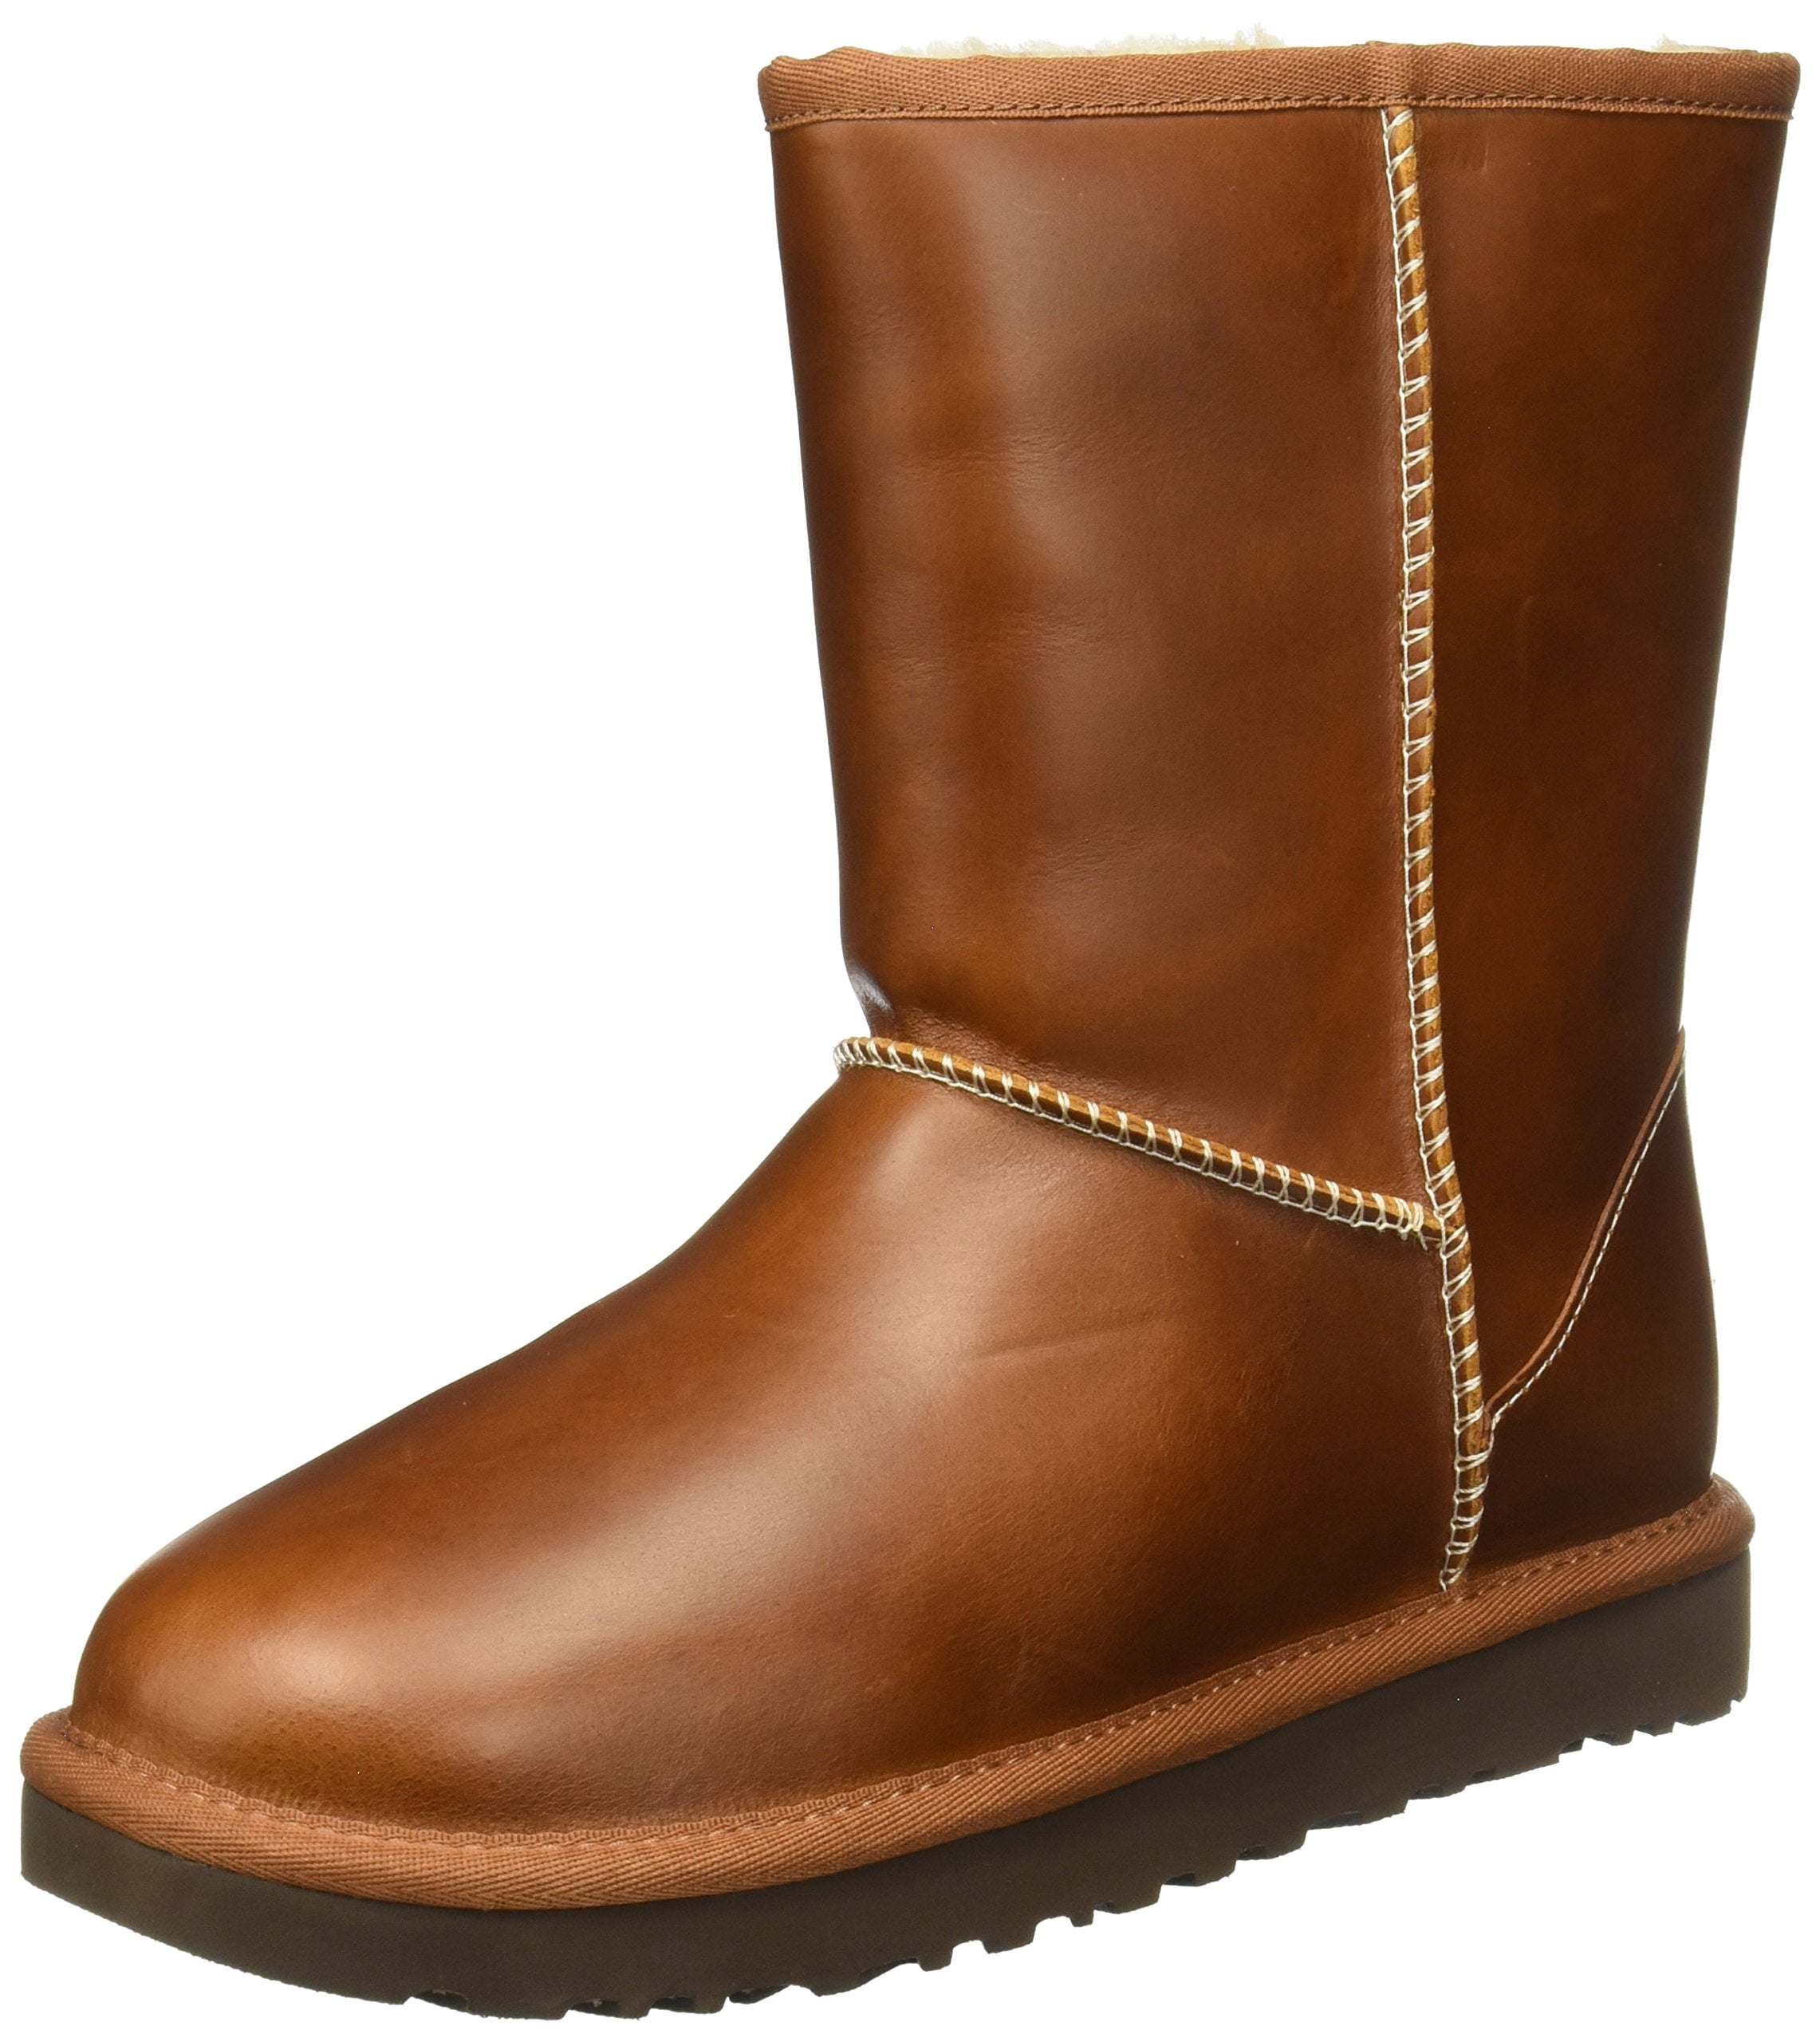 classic short leather uggs